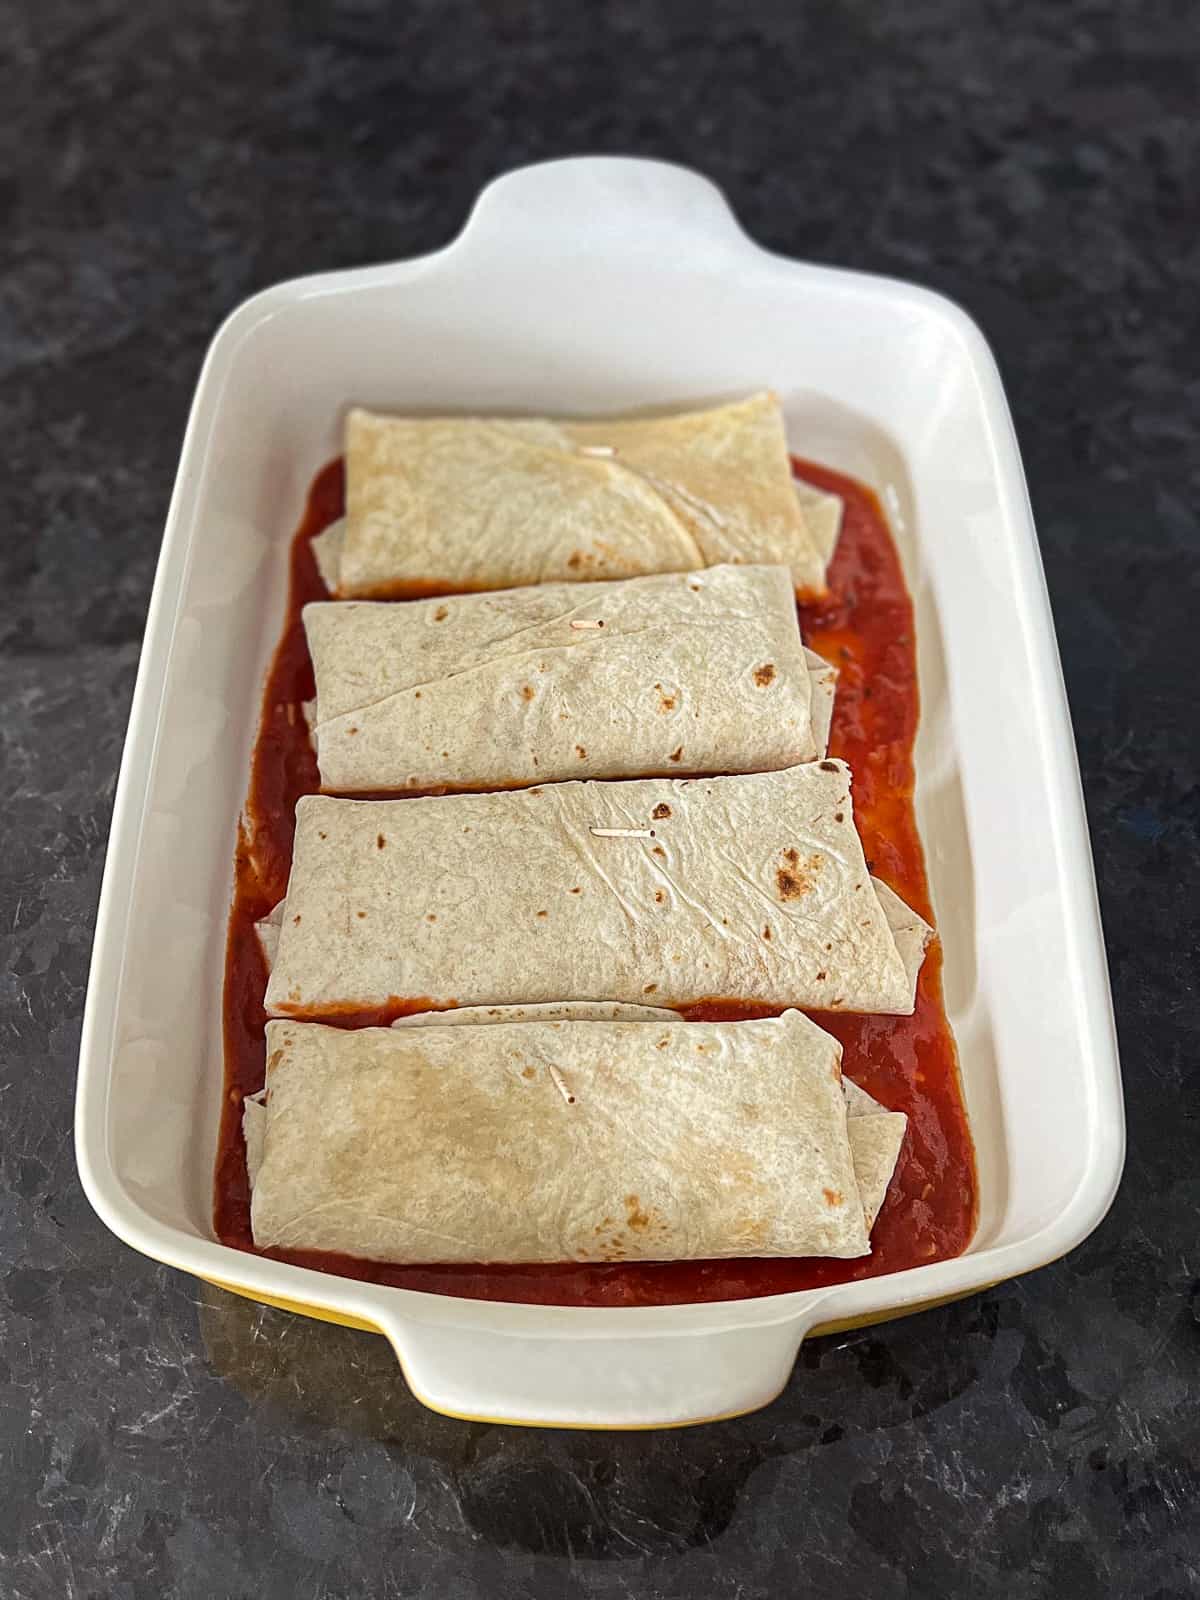 Homemade Red Enchilada Sauce in baking dish with enchiladas prepped in tortillas